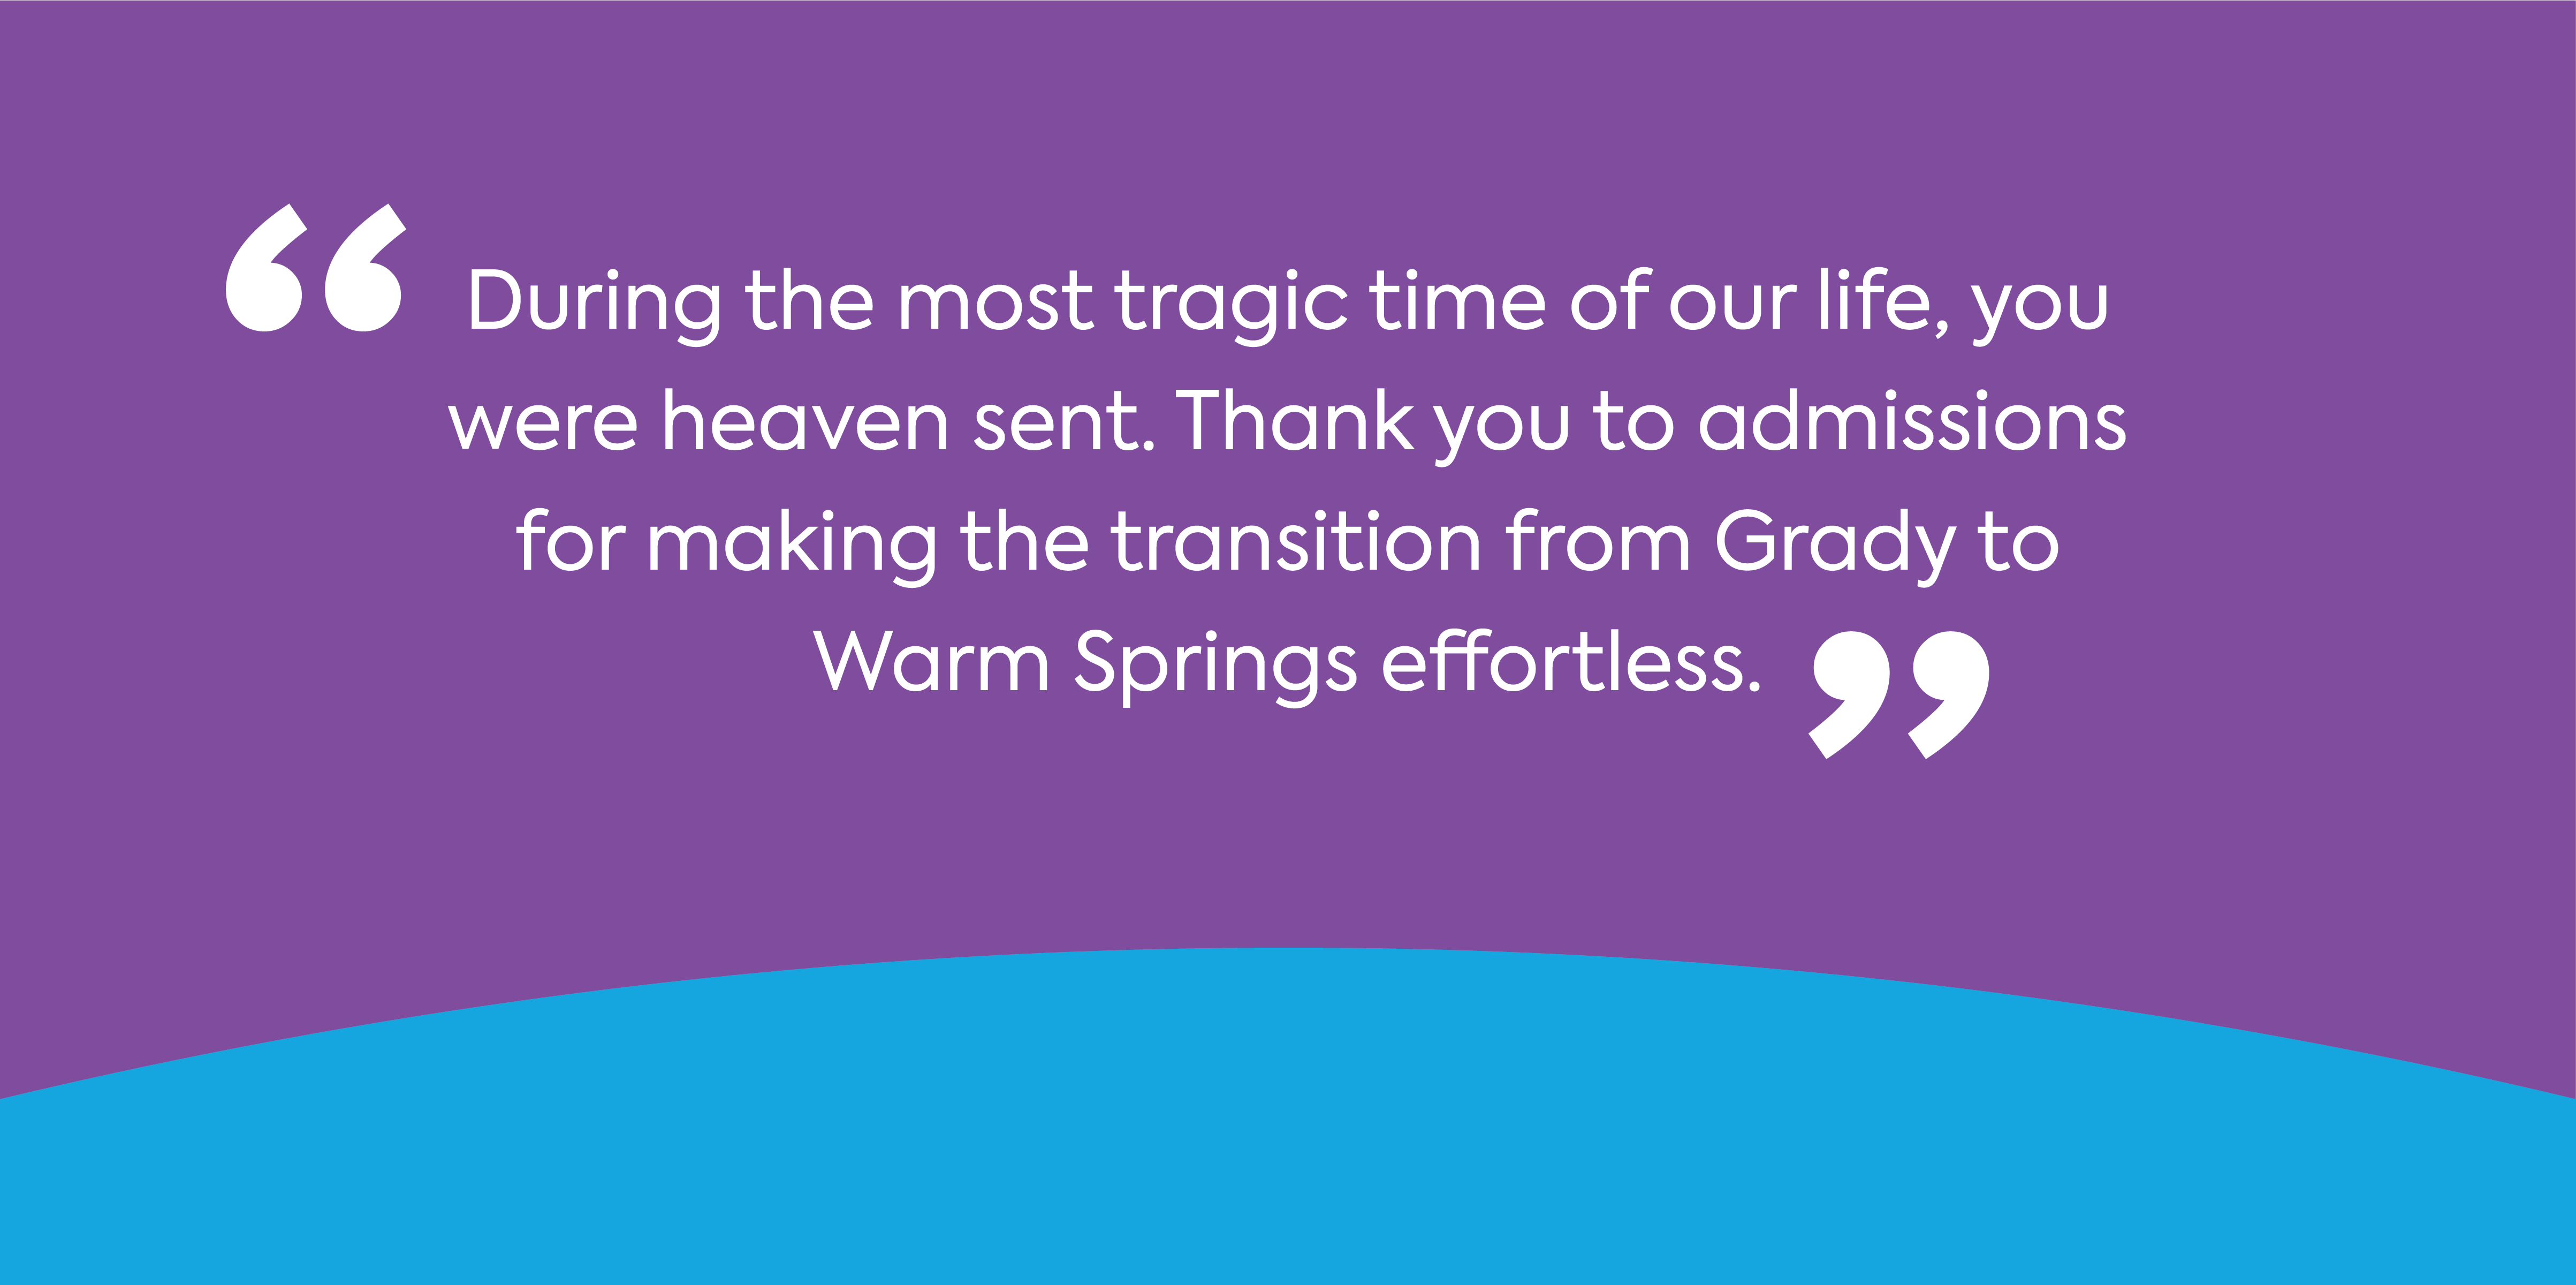 text: During the most tragic time of our life, you were heaven sent. Thank you to admissions for making the transition from Grady to  effortless.